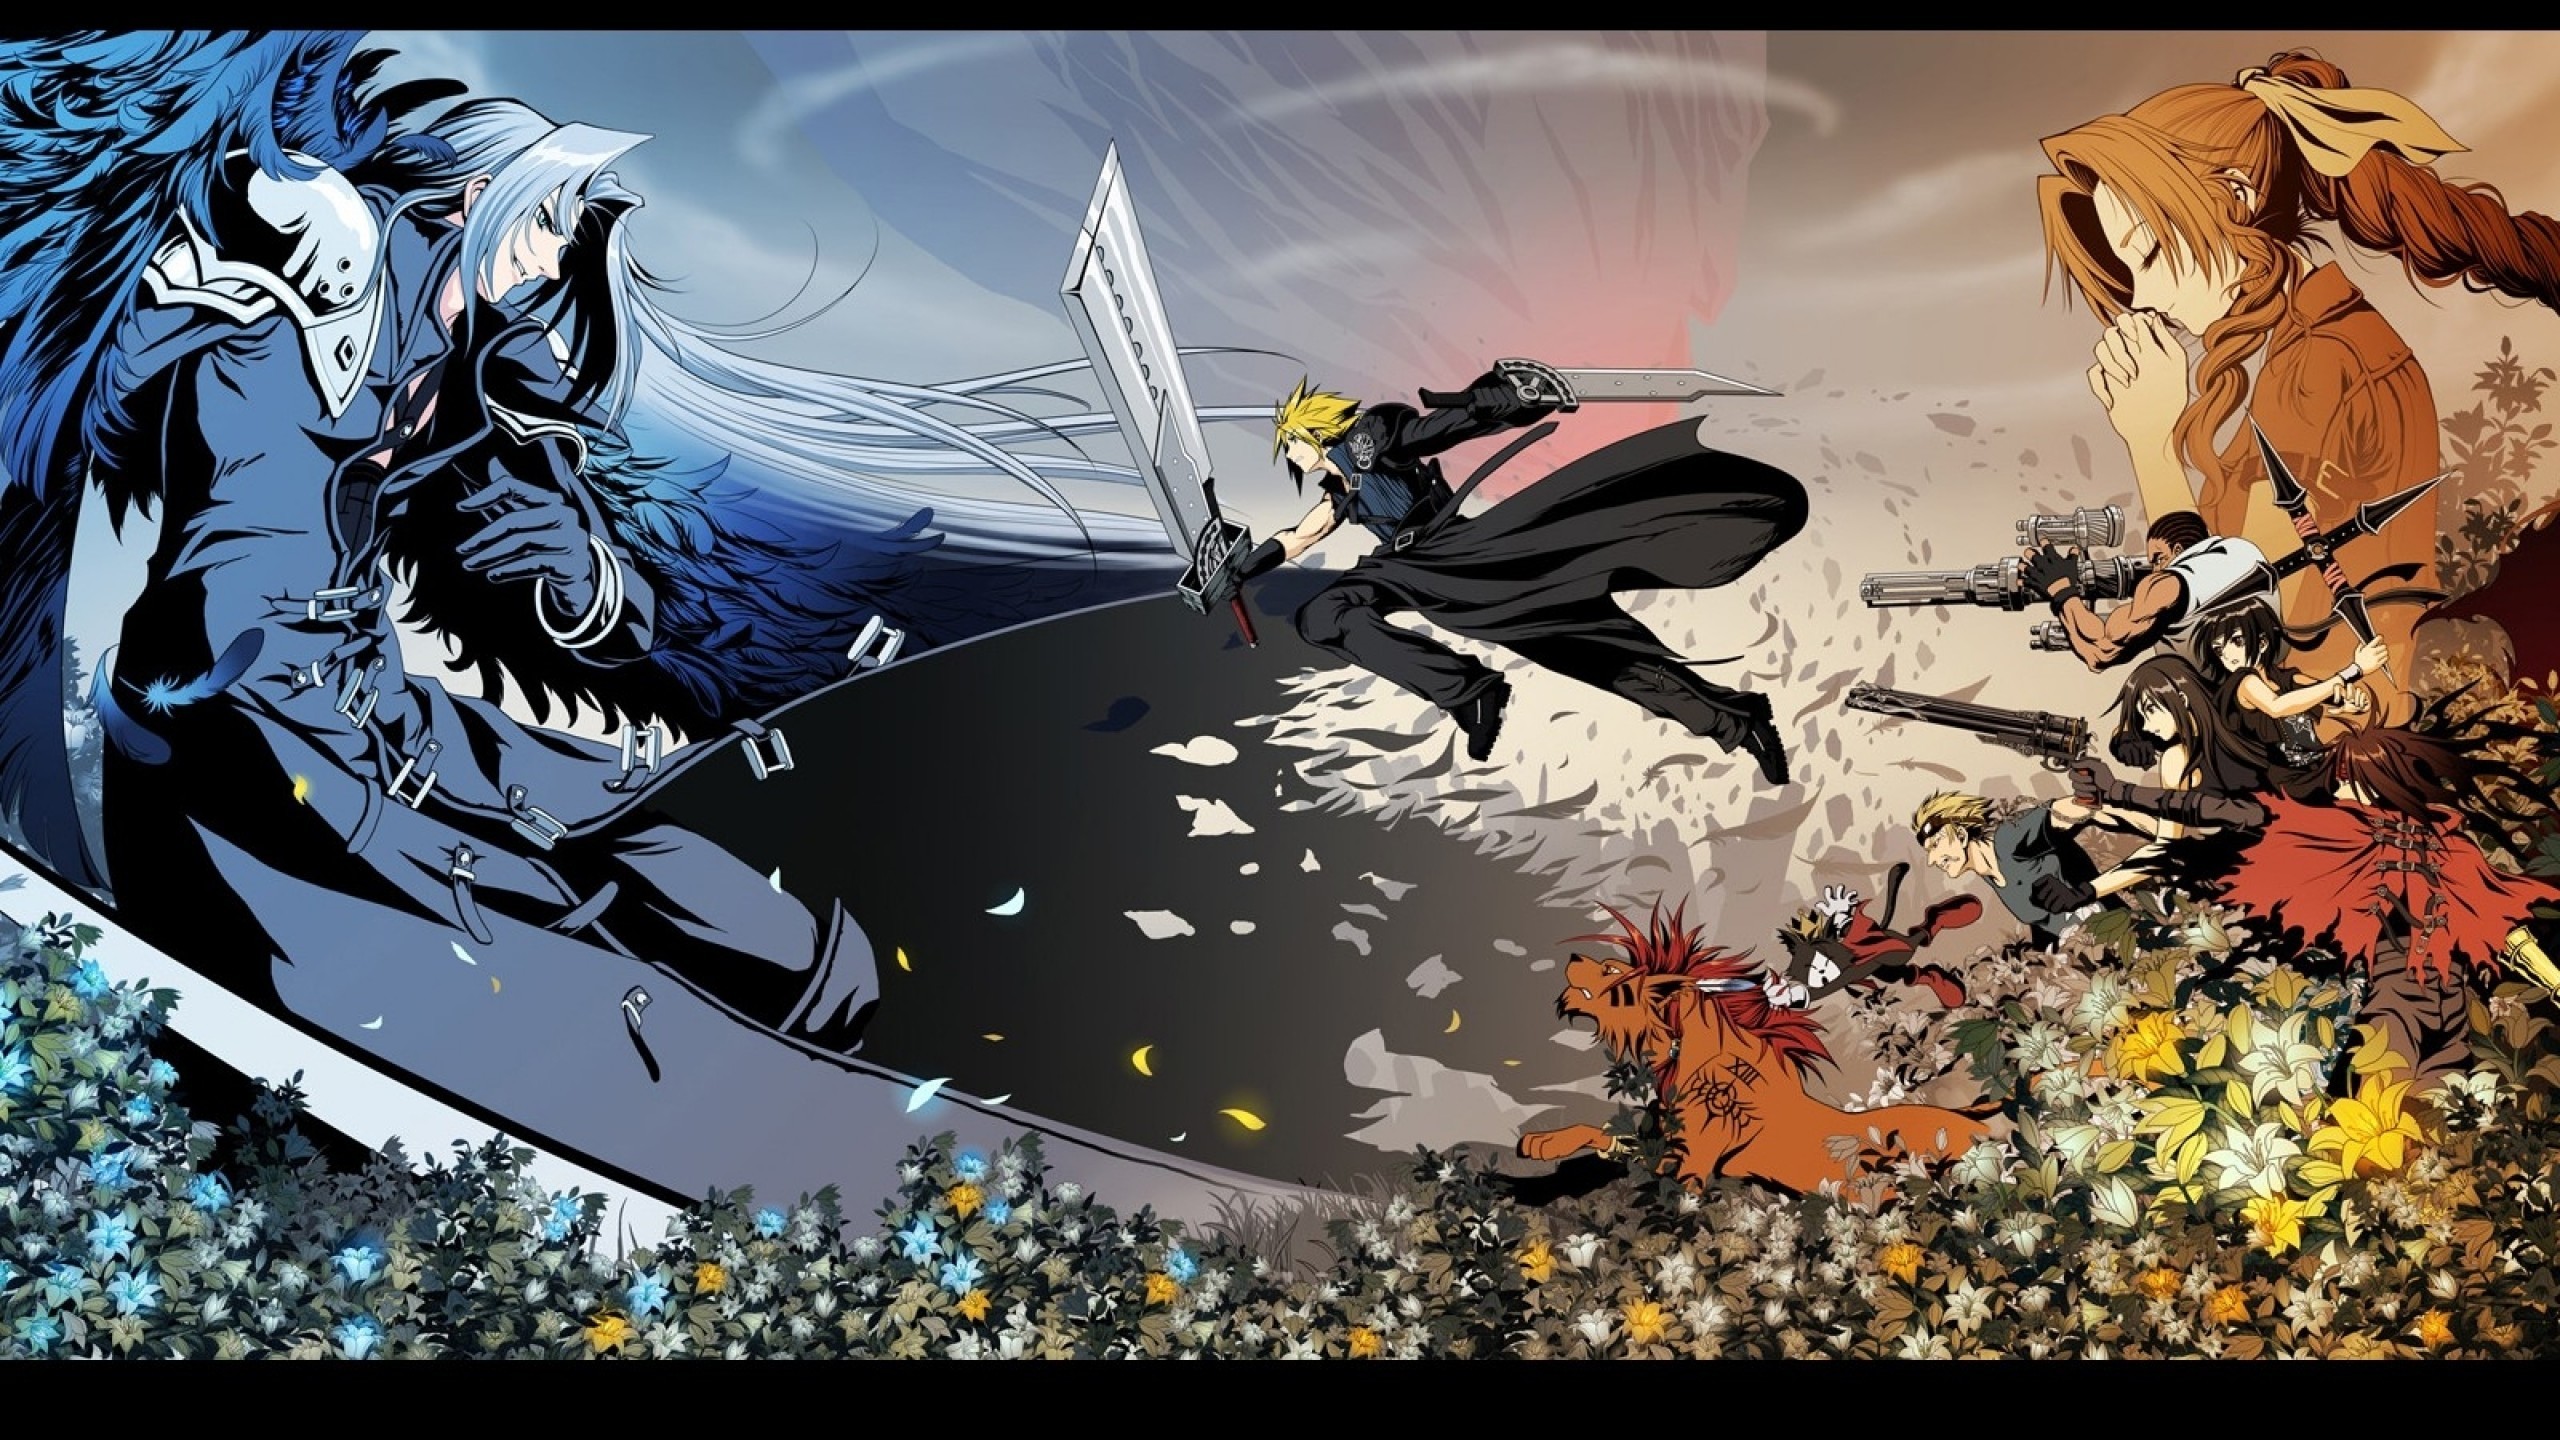 2560x1440 1920x1080 Cloud Strife Vs Sephiroth. UPLOAD. TAGS: Images Sephiroth Final  Fantasy